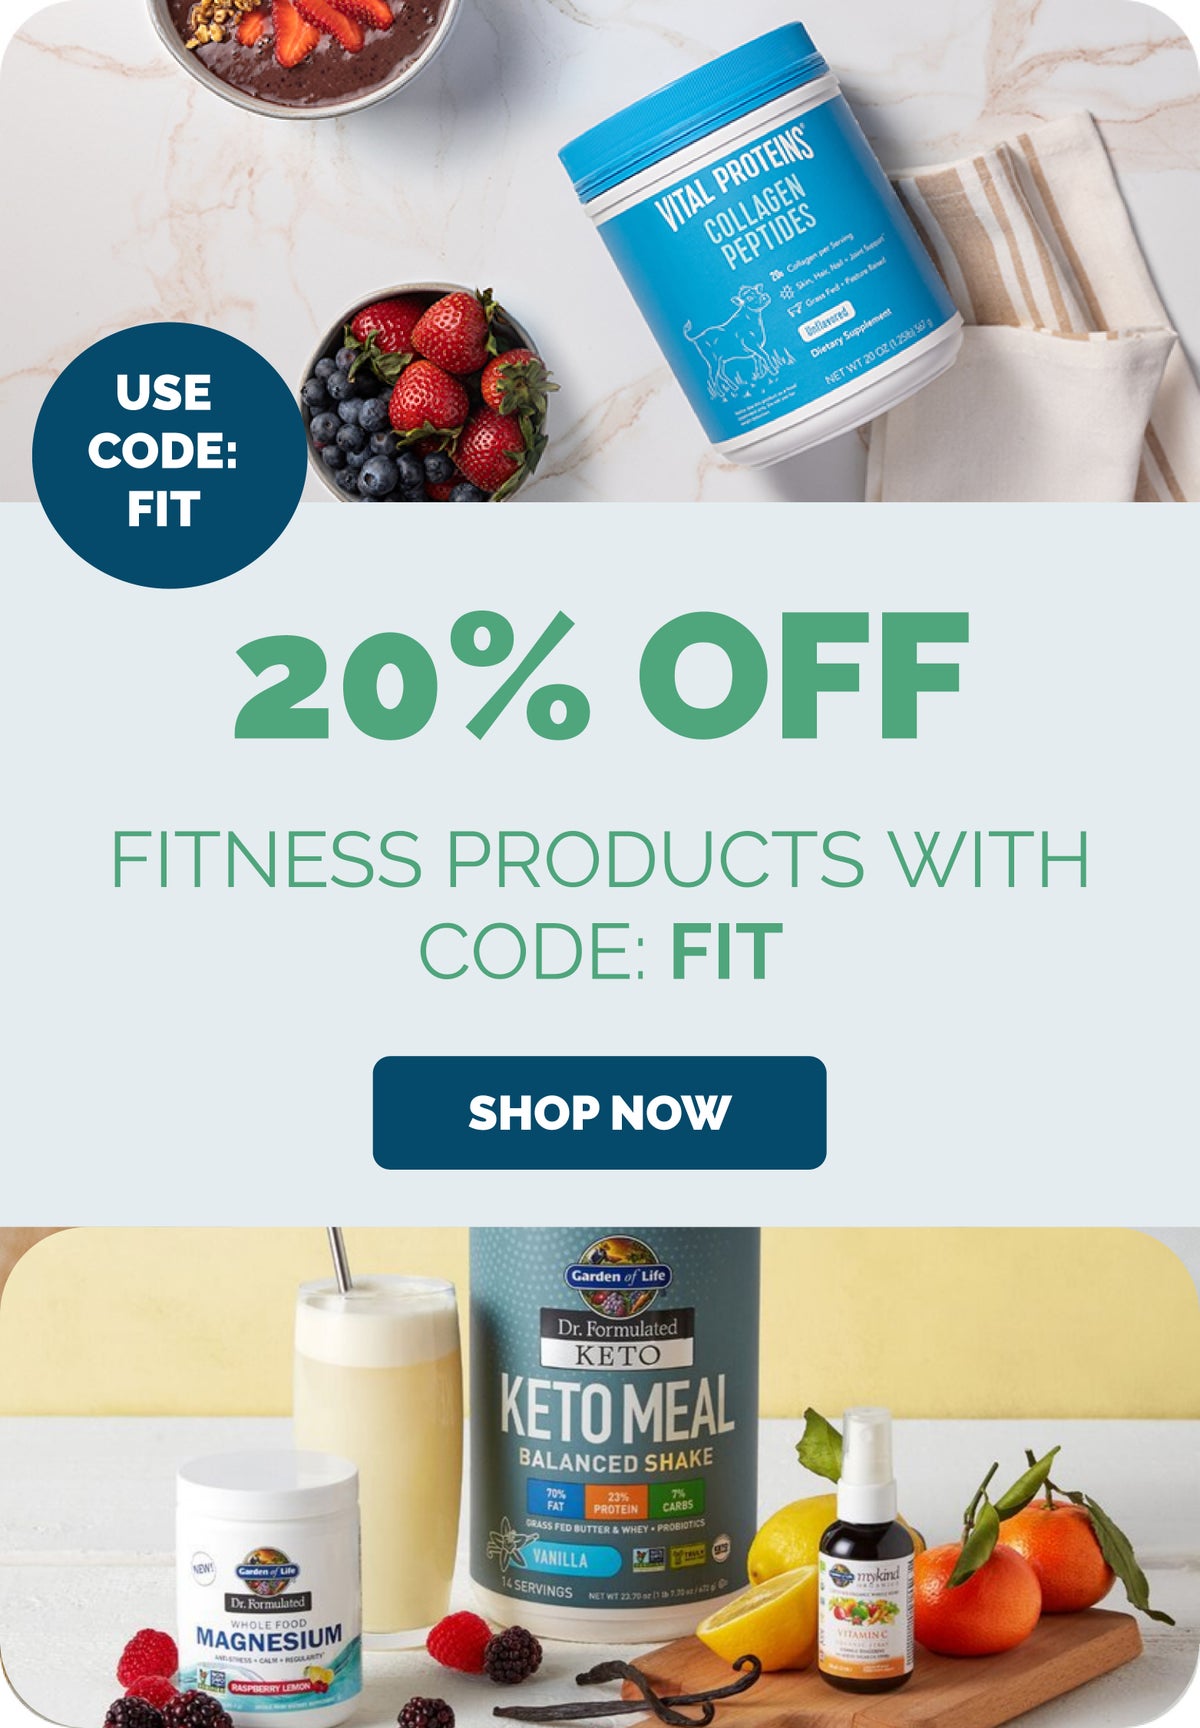 20% OFF SELECTED PRODUCTS WITH CODE FIT